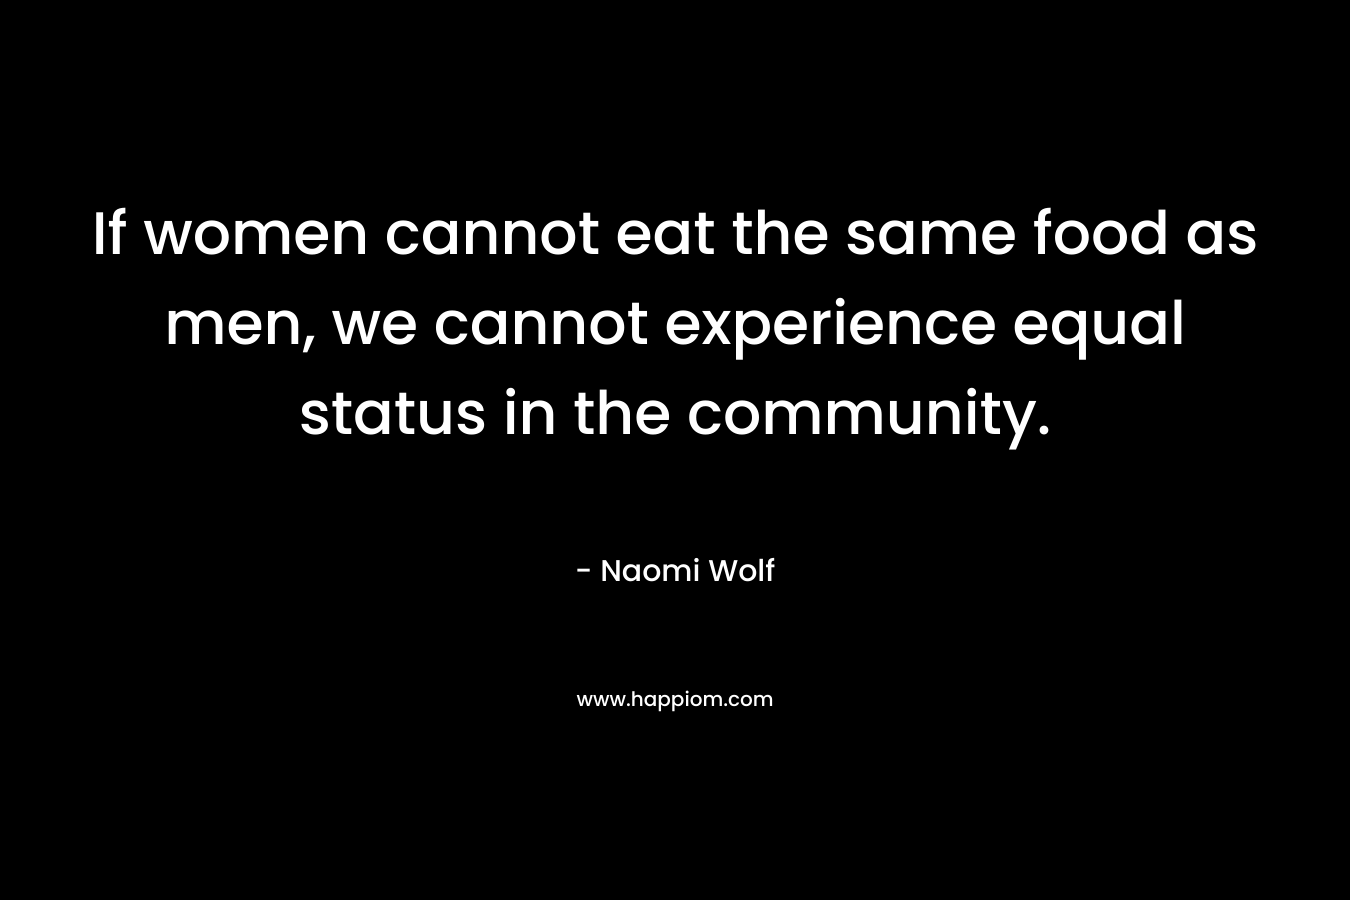 If women cannot eat the same food as men, we cannot experience equal status in the community.